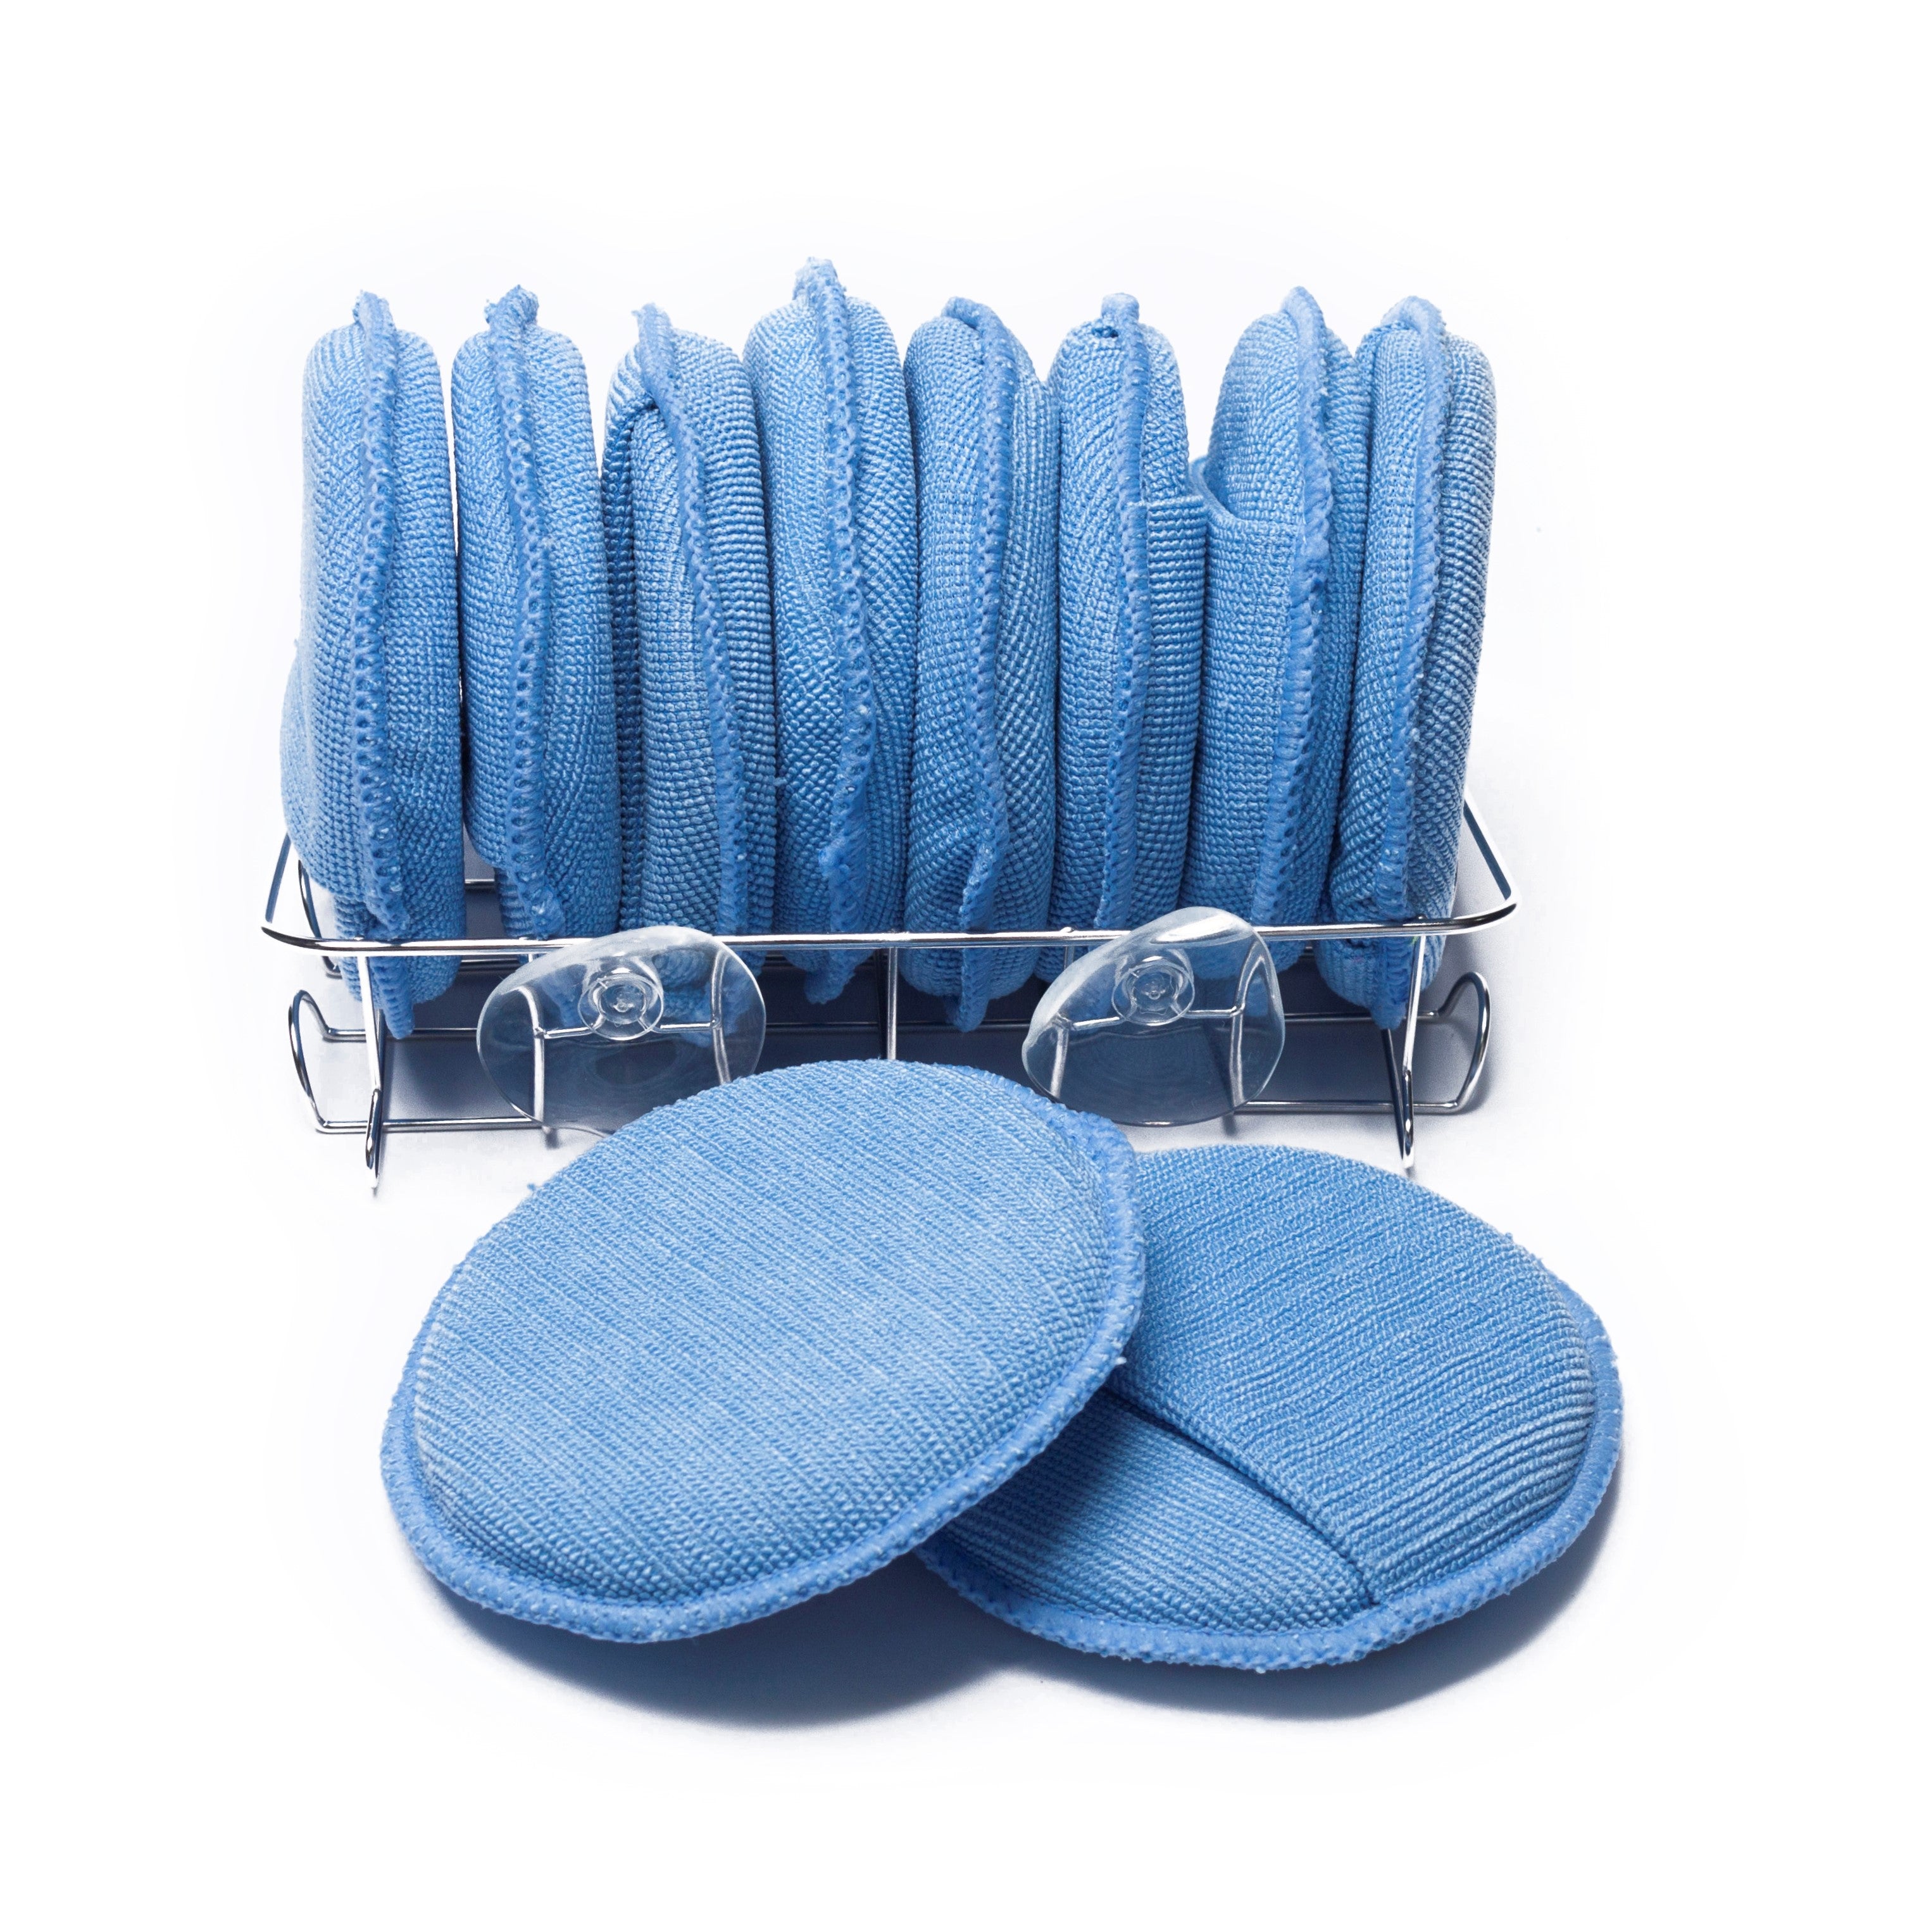 LTWHOME Value Pack of Microfiber Wax Applicator Cleaning Sponge with Finger Pocket and Large Sponge Holder (Pack of 11)